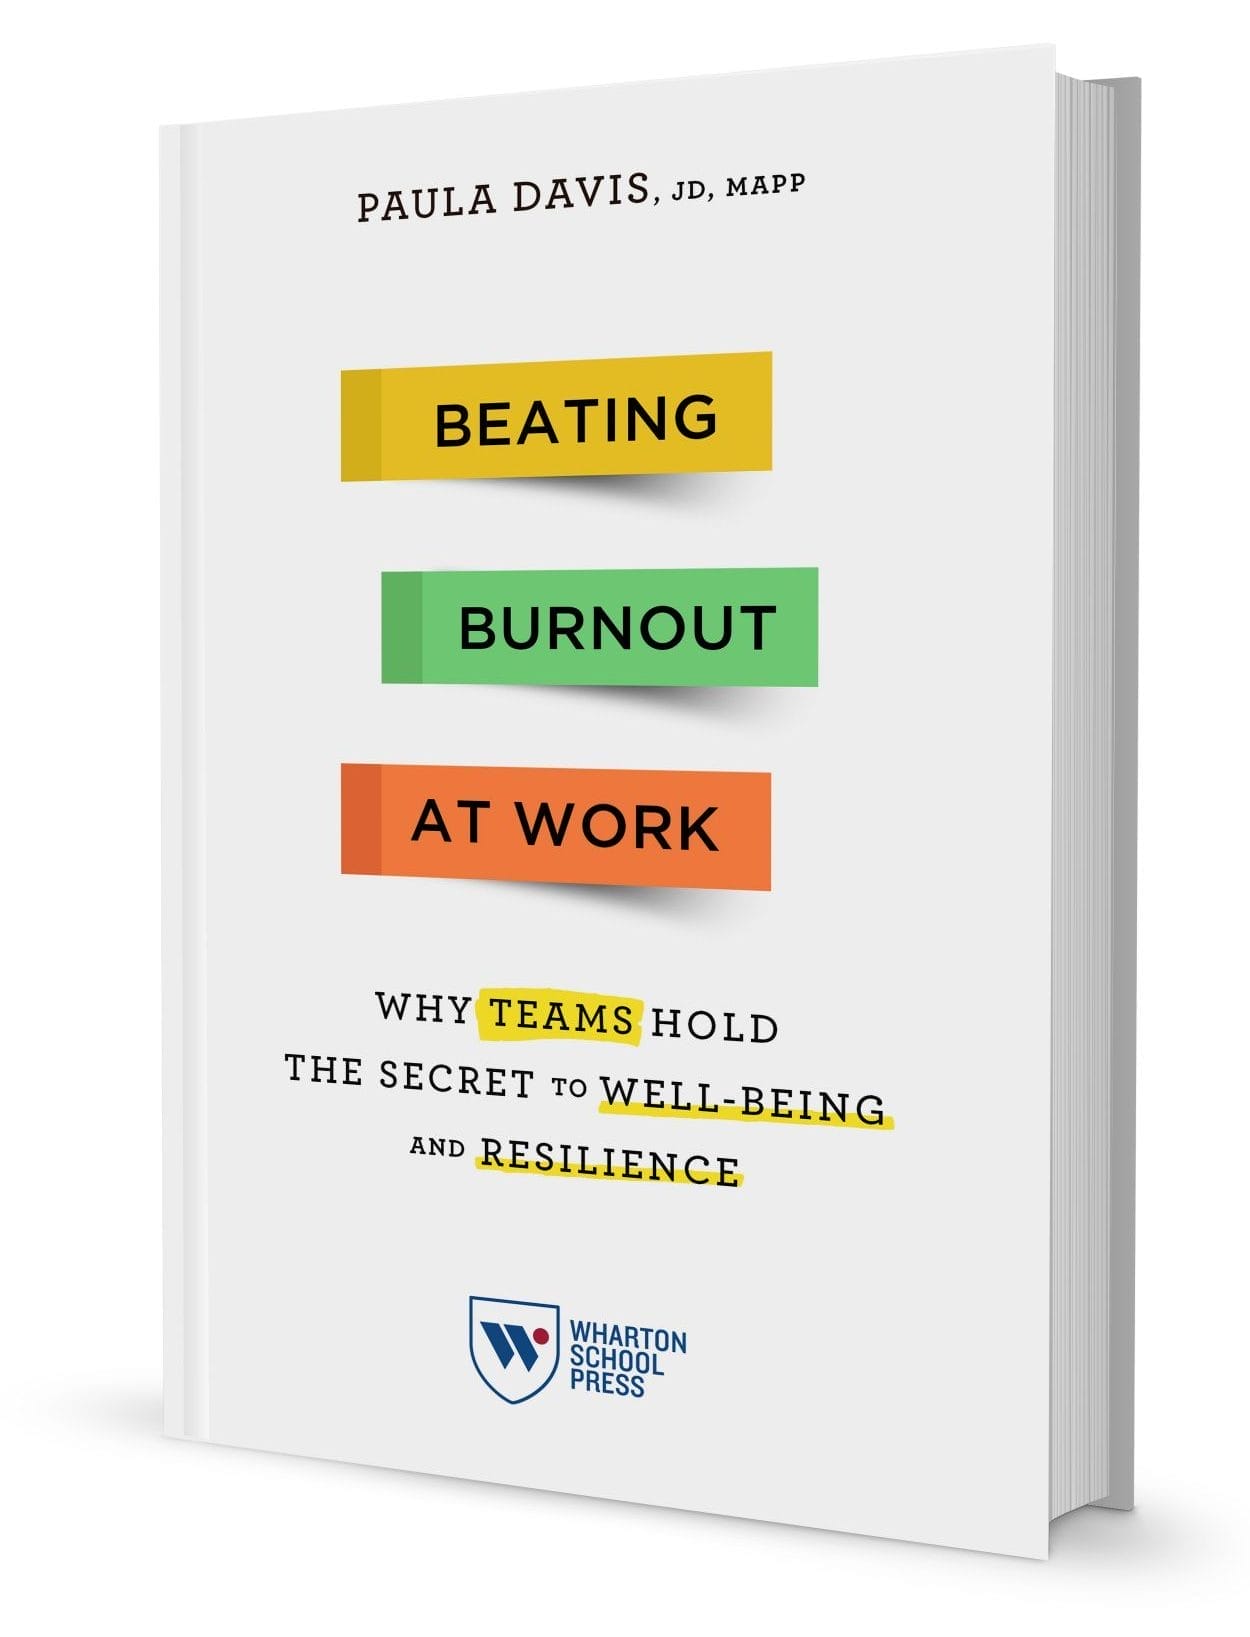 The Book Beating Burnout at Work